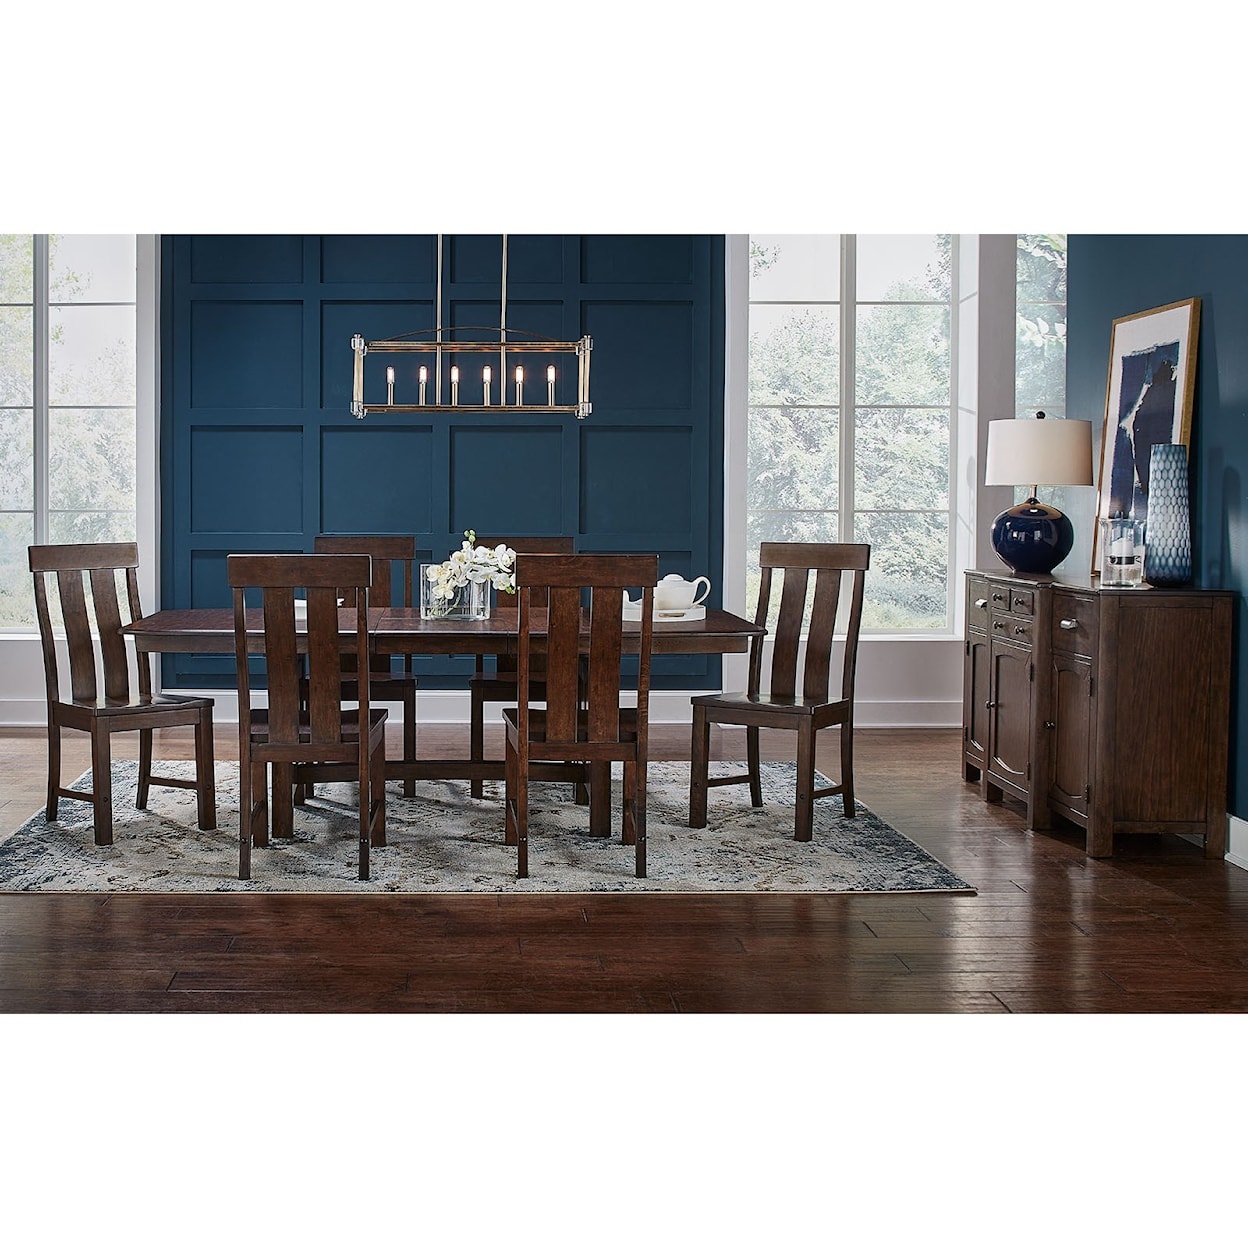 A-A Henderson 7-Piece Trestle Table and Chair Set